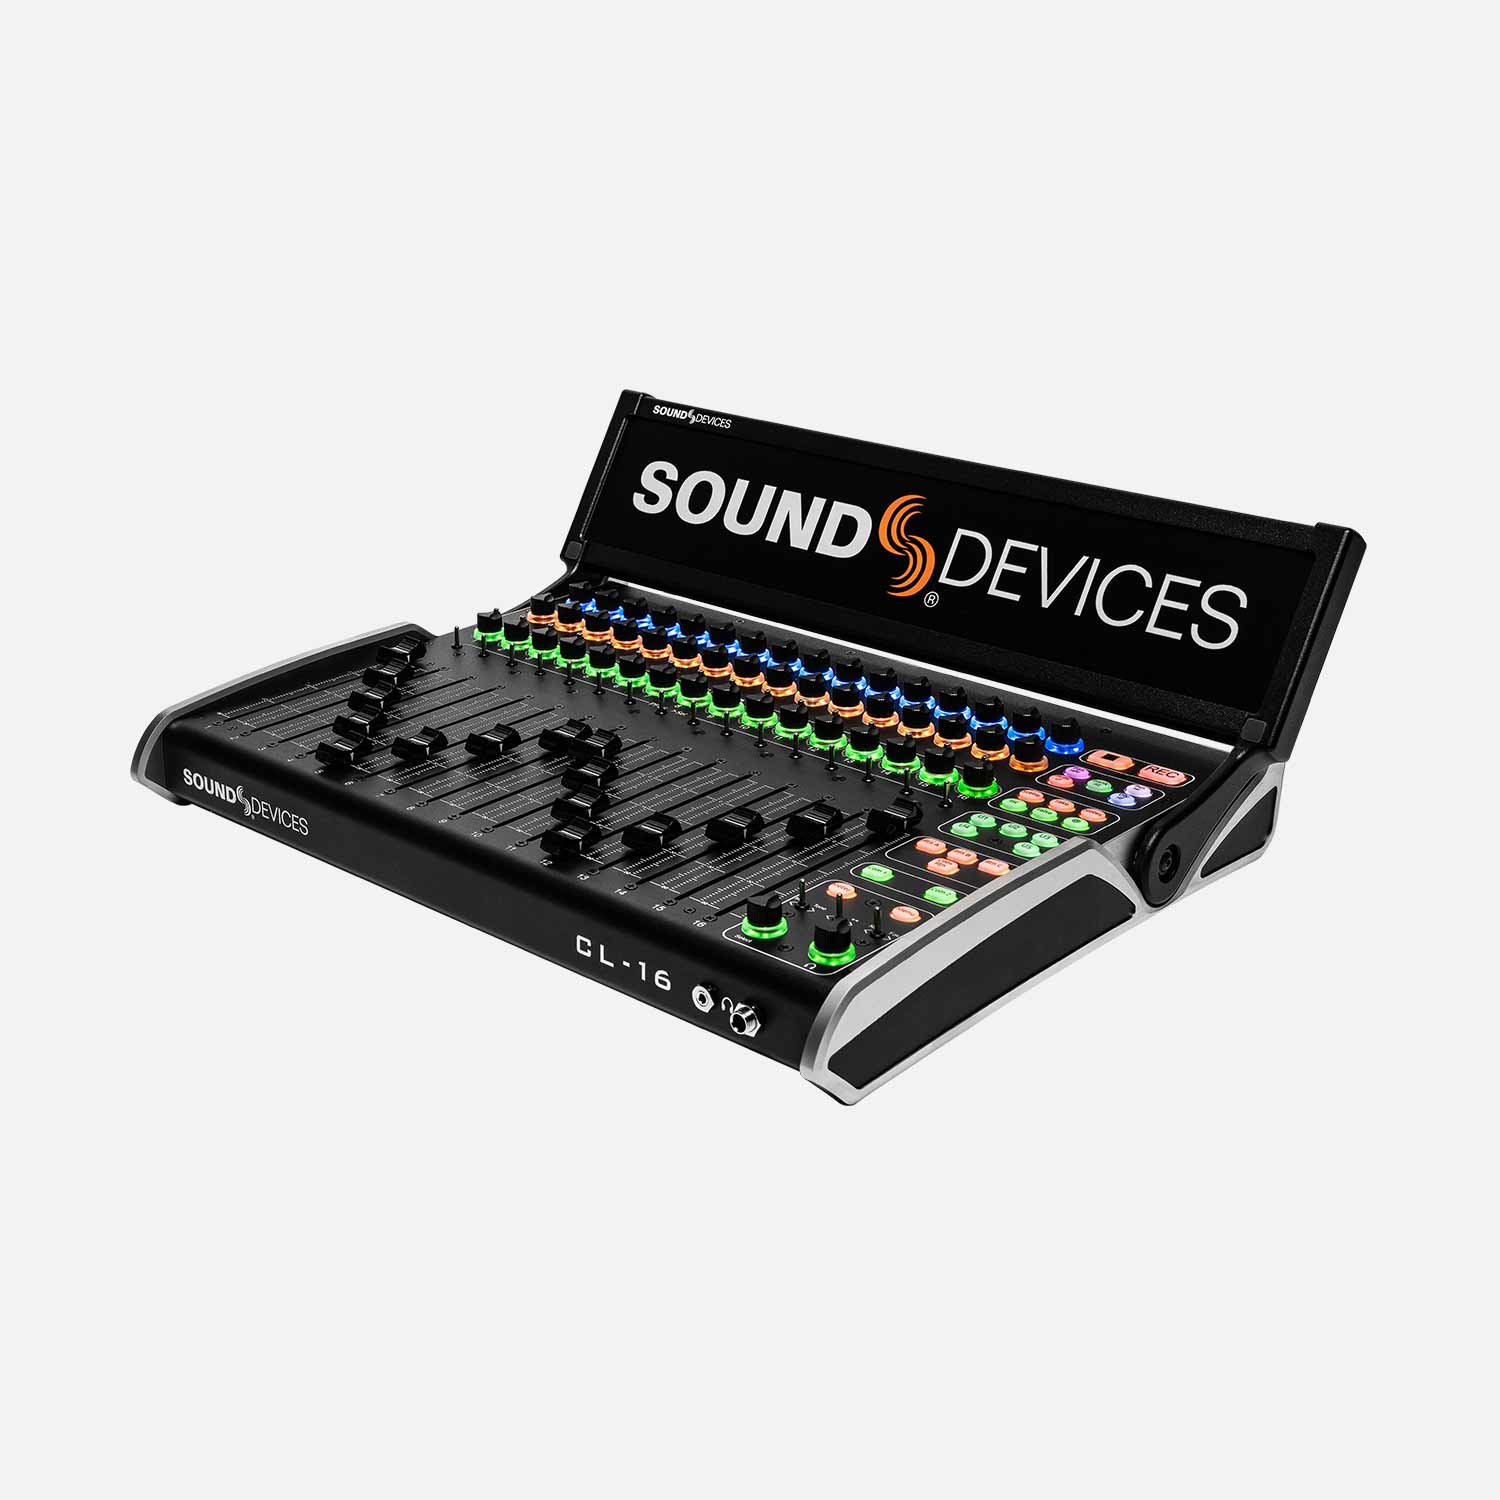 Sound Devices CL-16, 8 series Mixer